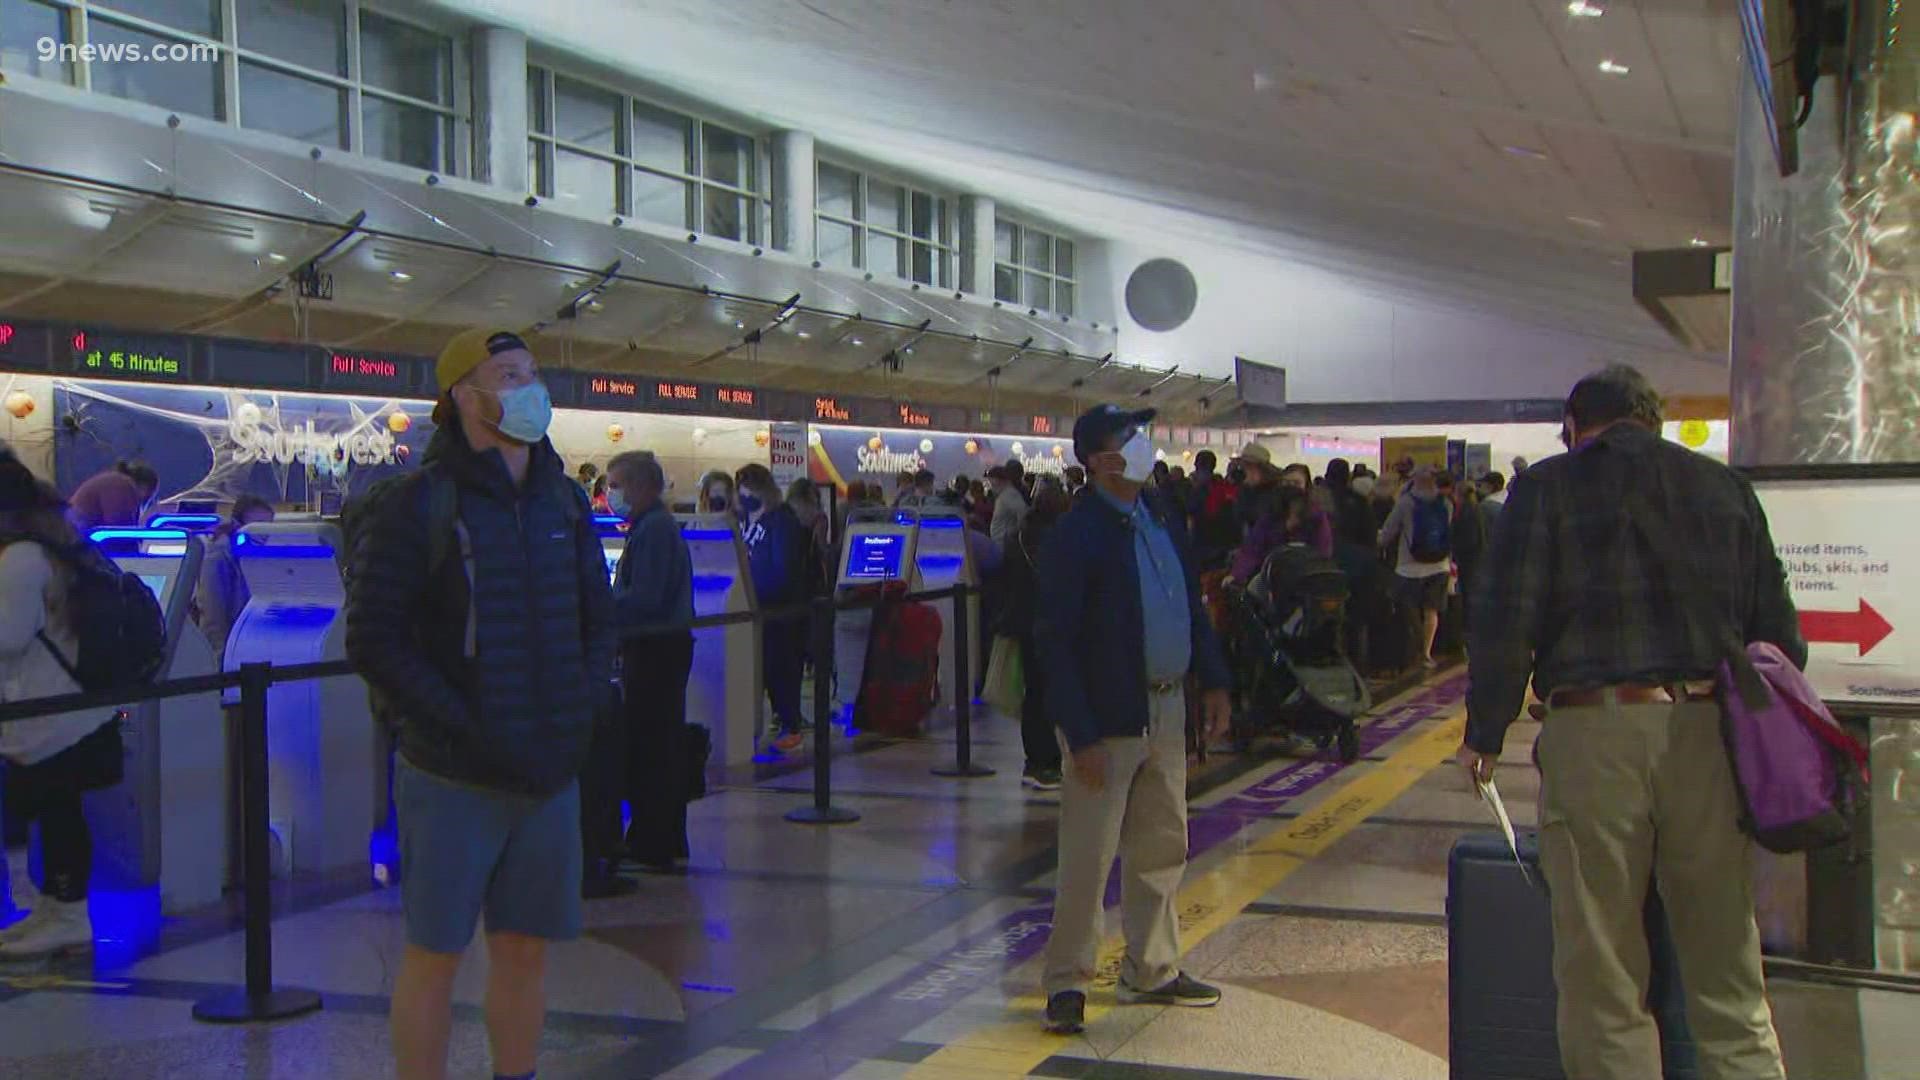 Flight delays and cancellation continue to impact the plans of travelers at Denver International Airport and nationwide on Monday.